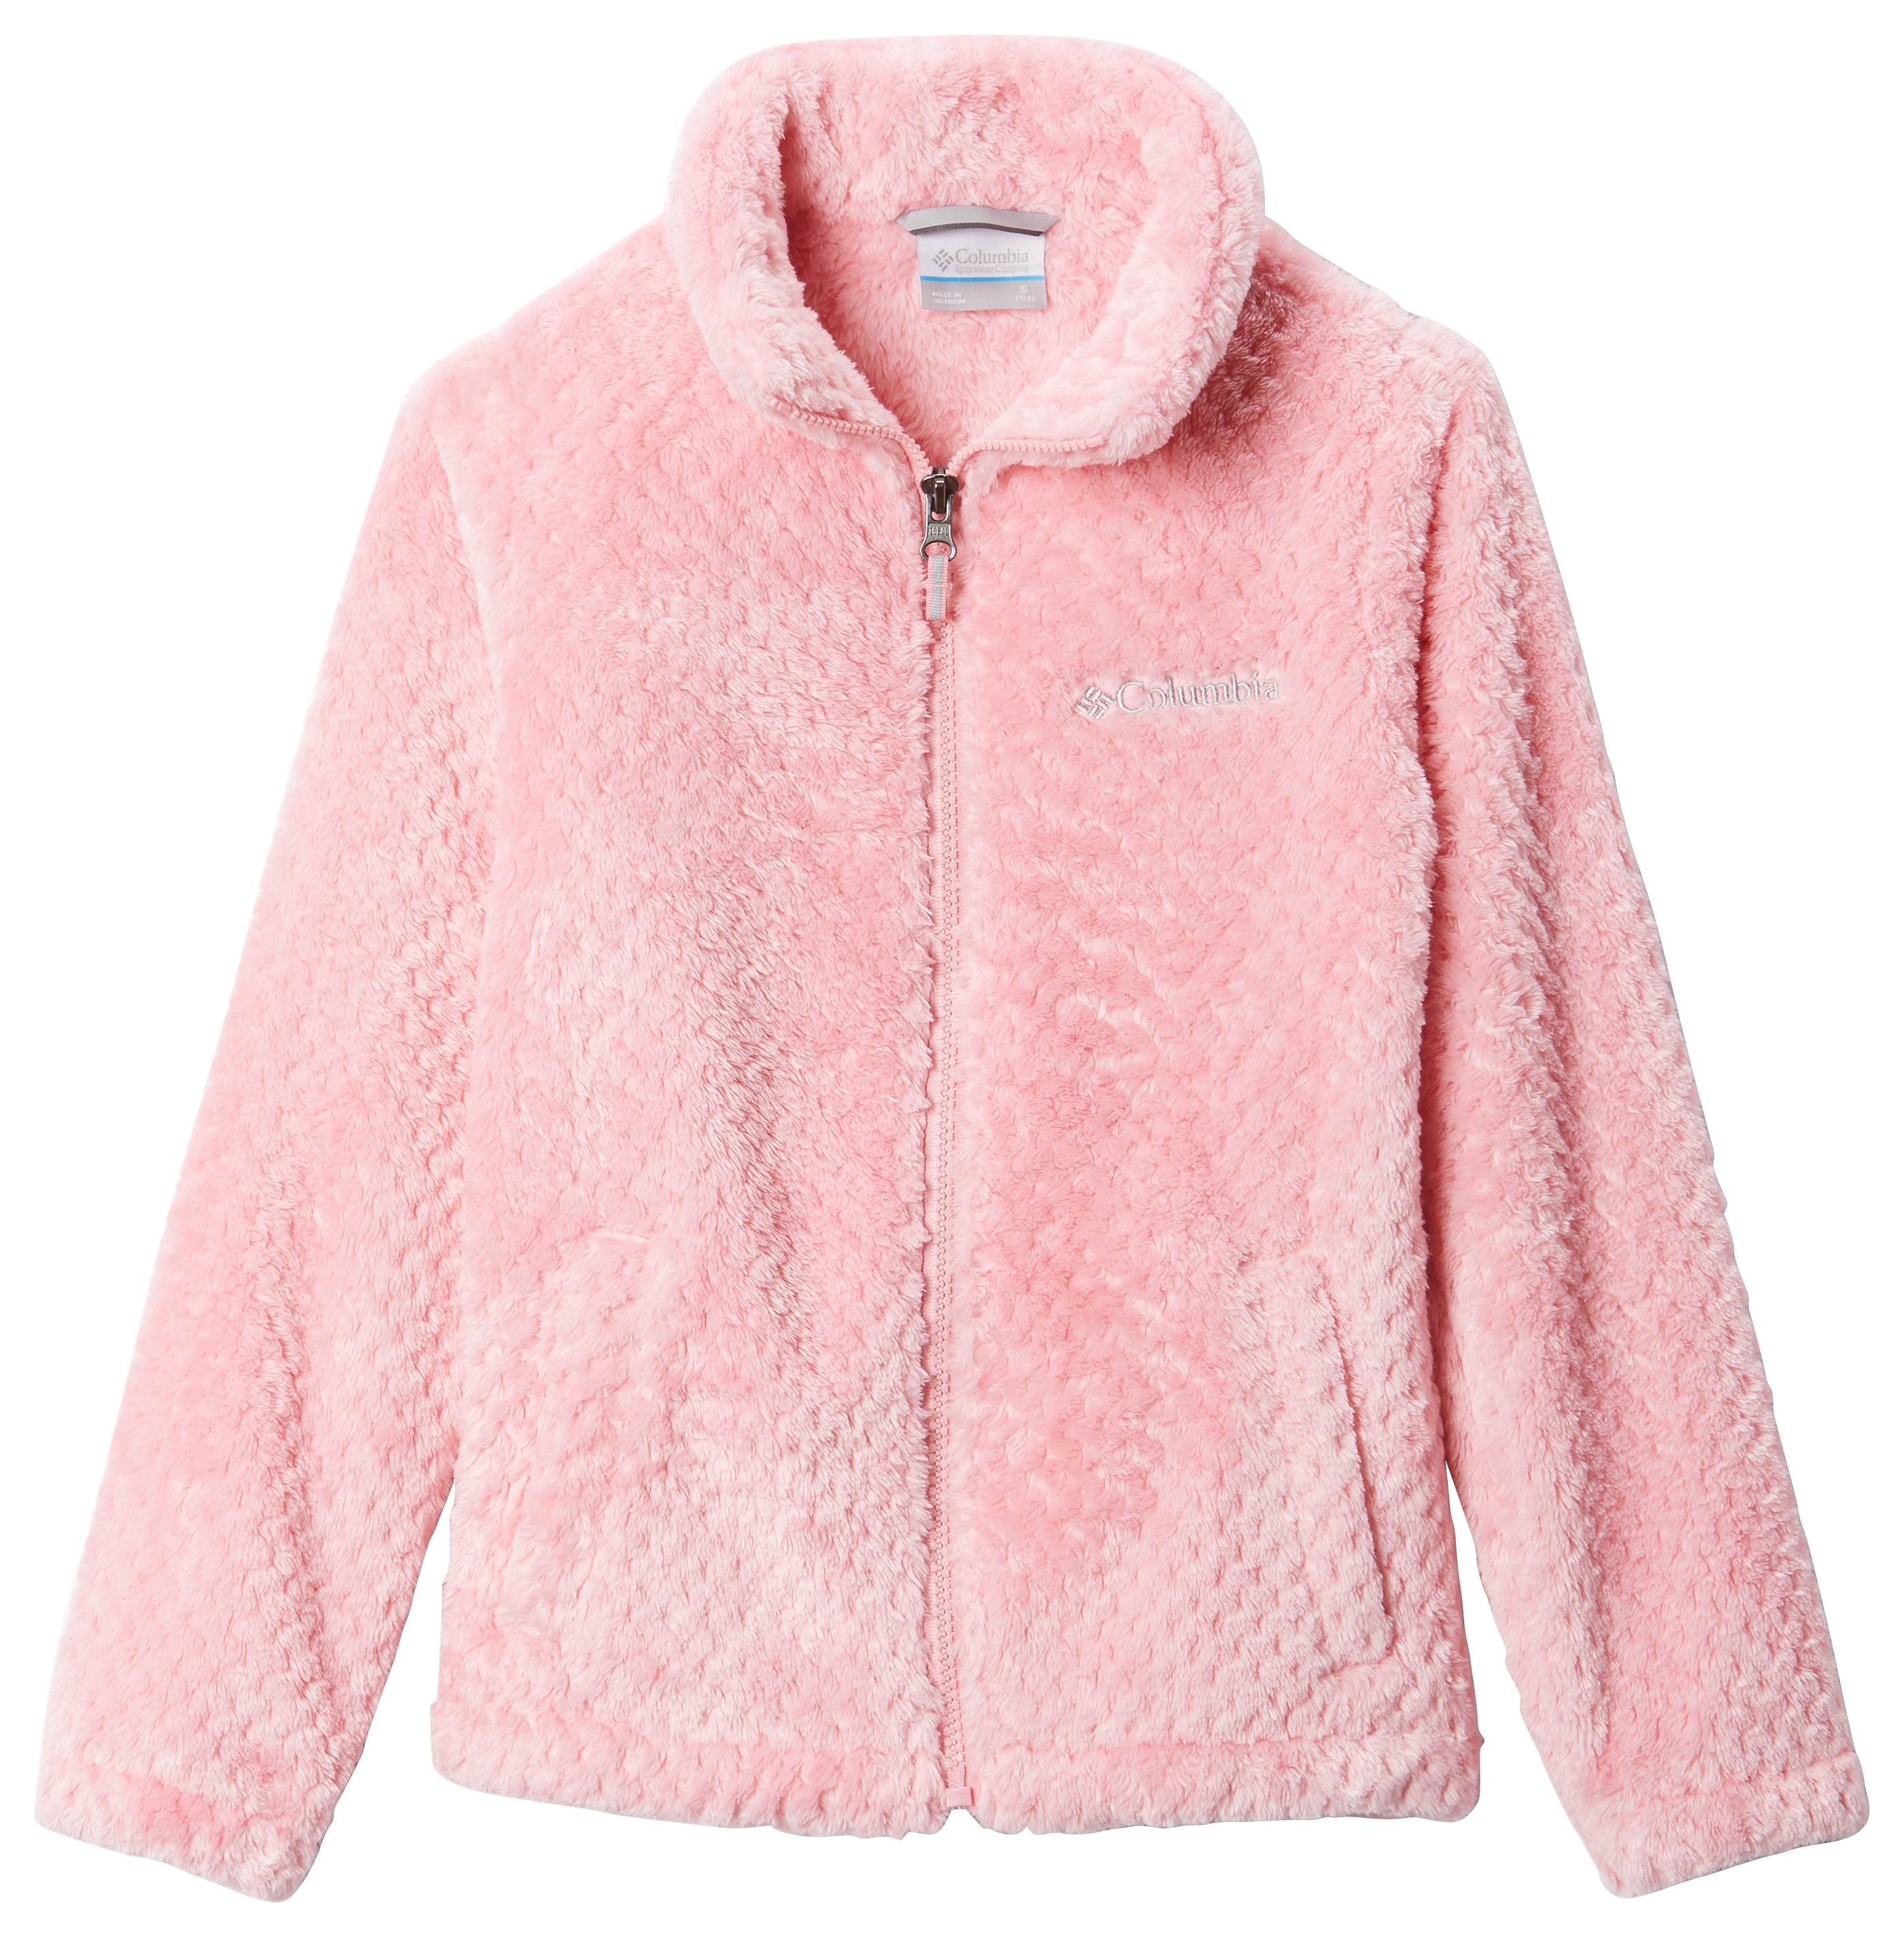 Kids Full-Zip or Jacket Toddlers Side for Sherpa Fire | Bass Columbia Pro Shops